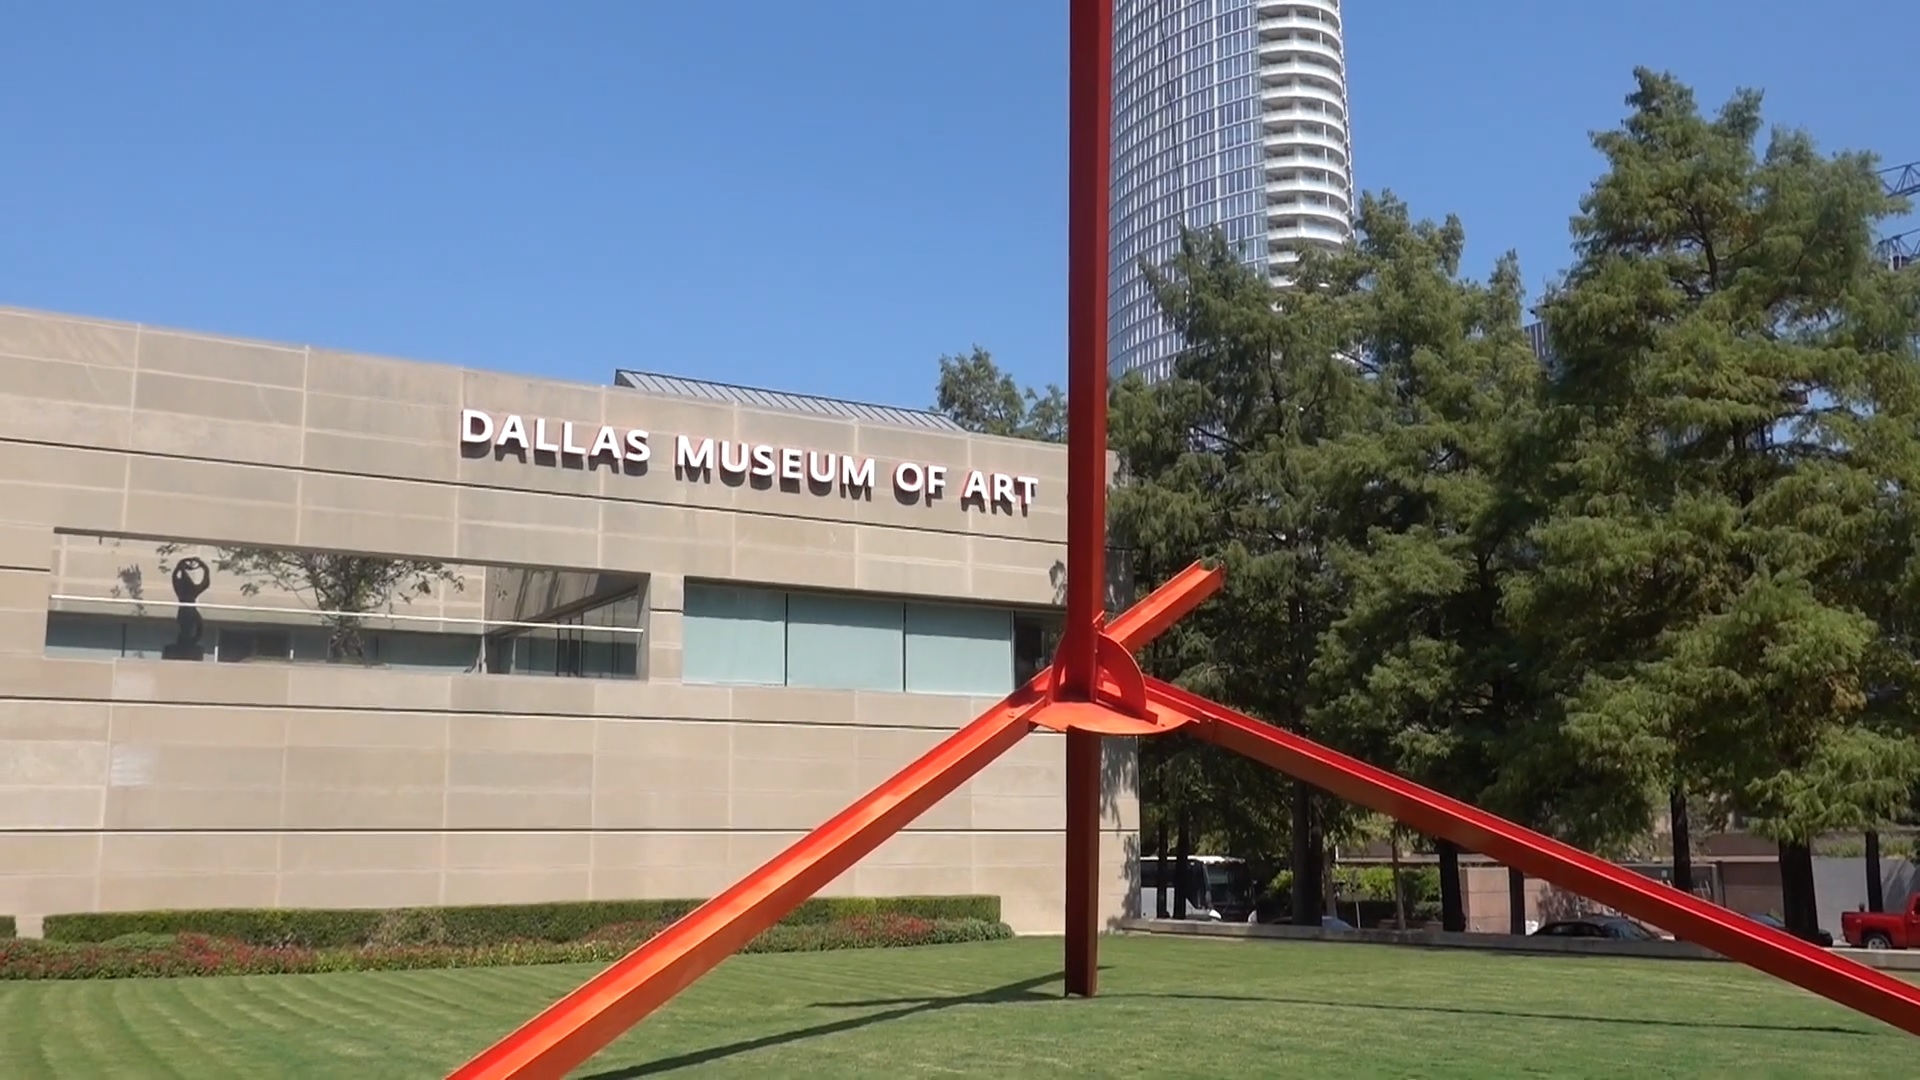 Dallas Museum of Art at 8 minutes drive to the south of Dallas dentist Fitz Dental